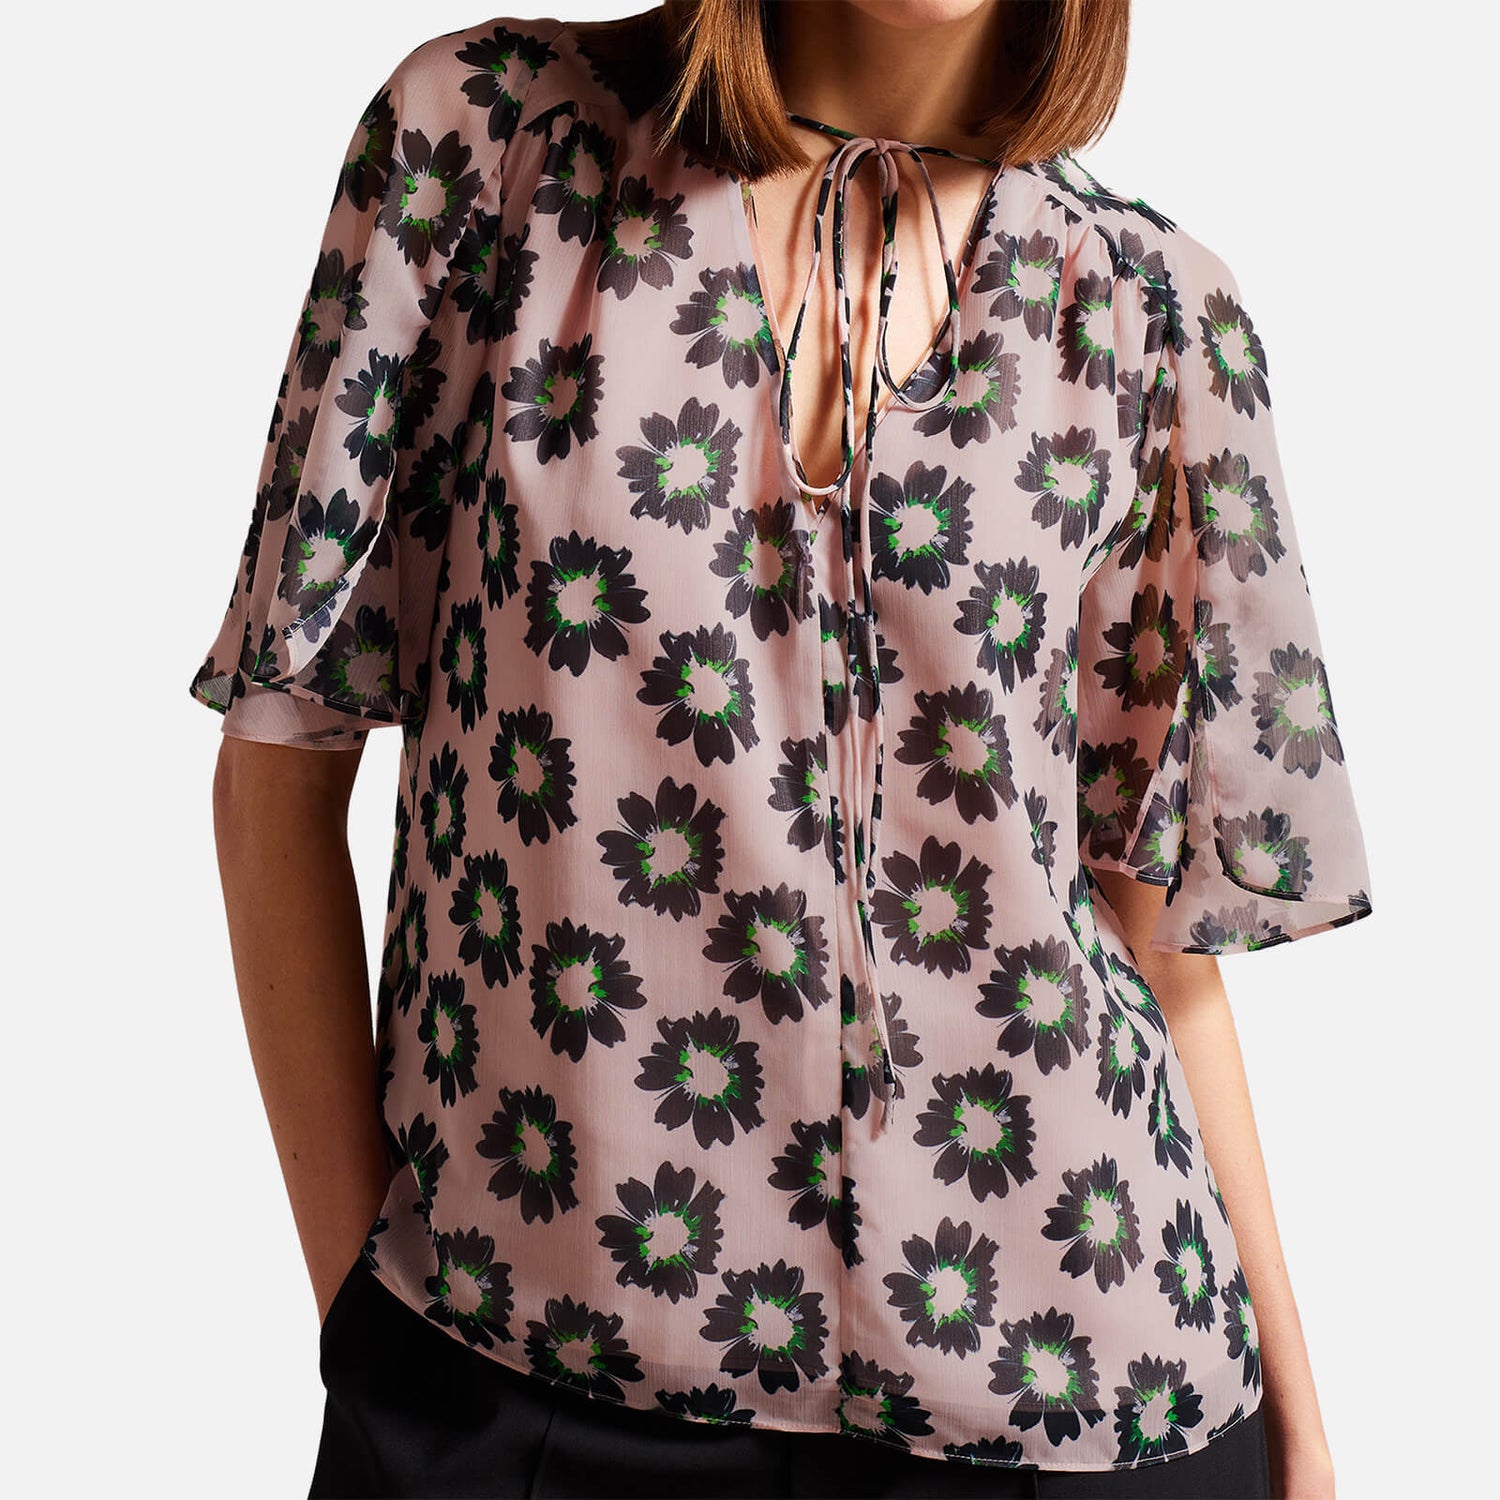 Ted Baker Harlynn Floral Tie Chiffon Top - UK 6